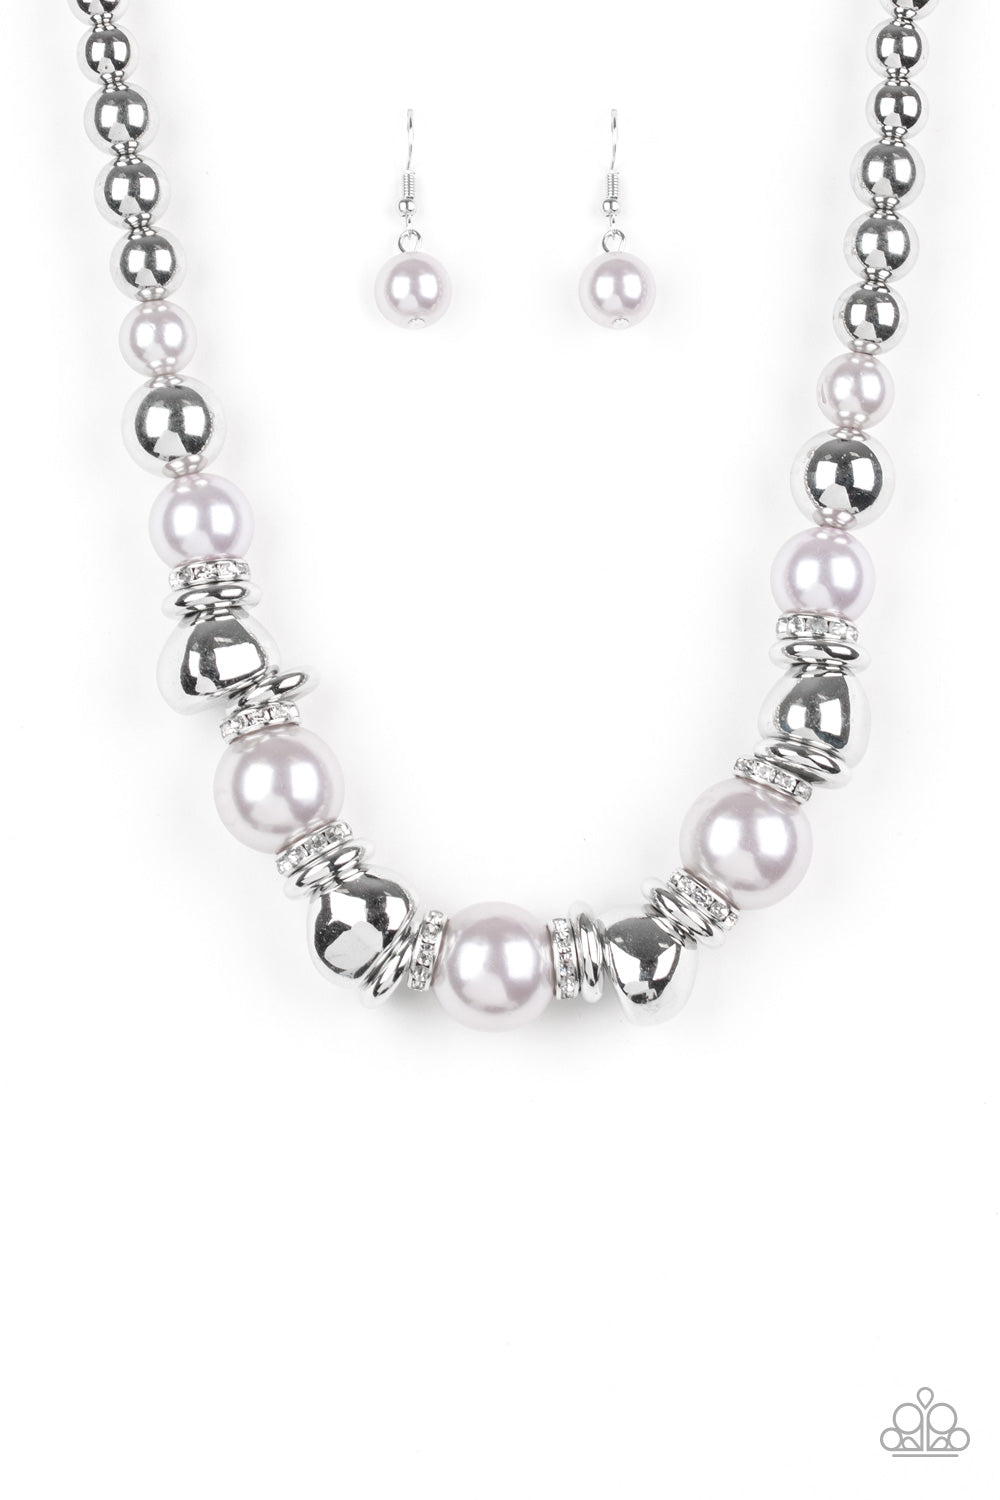 Hollywood HAUTE Spot Silver Necklace - Paparazzi Accessories